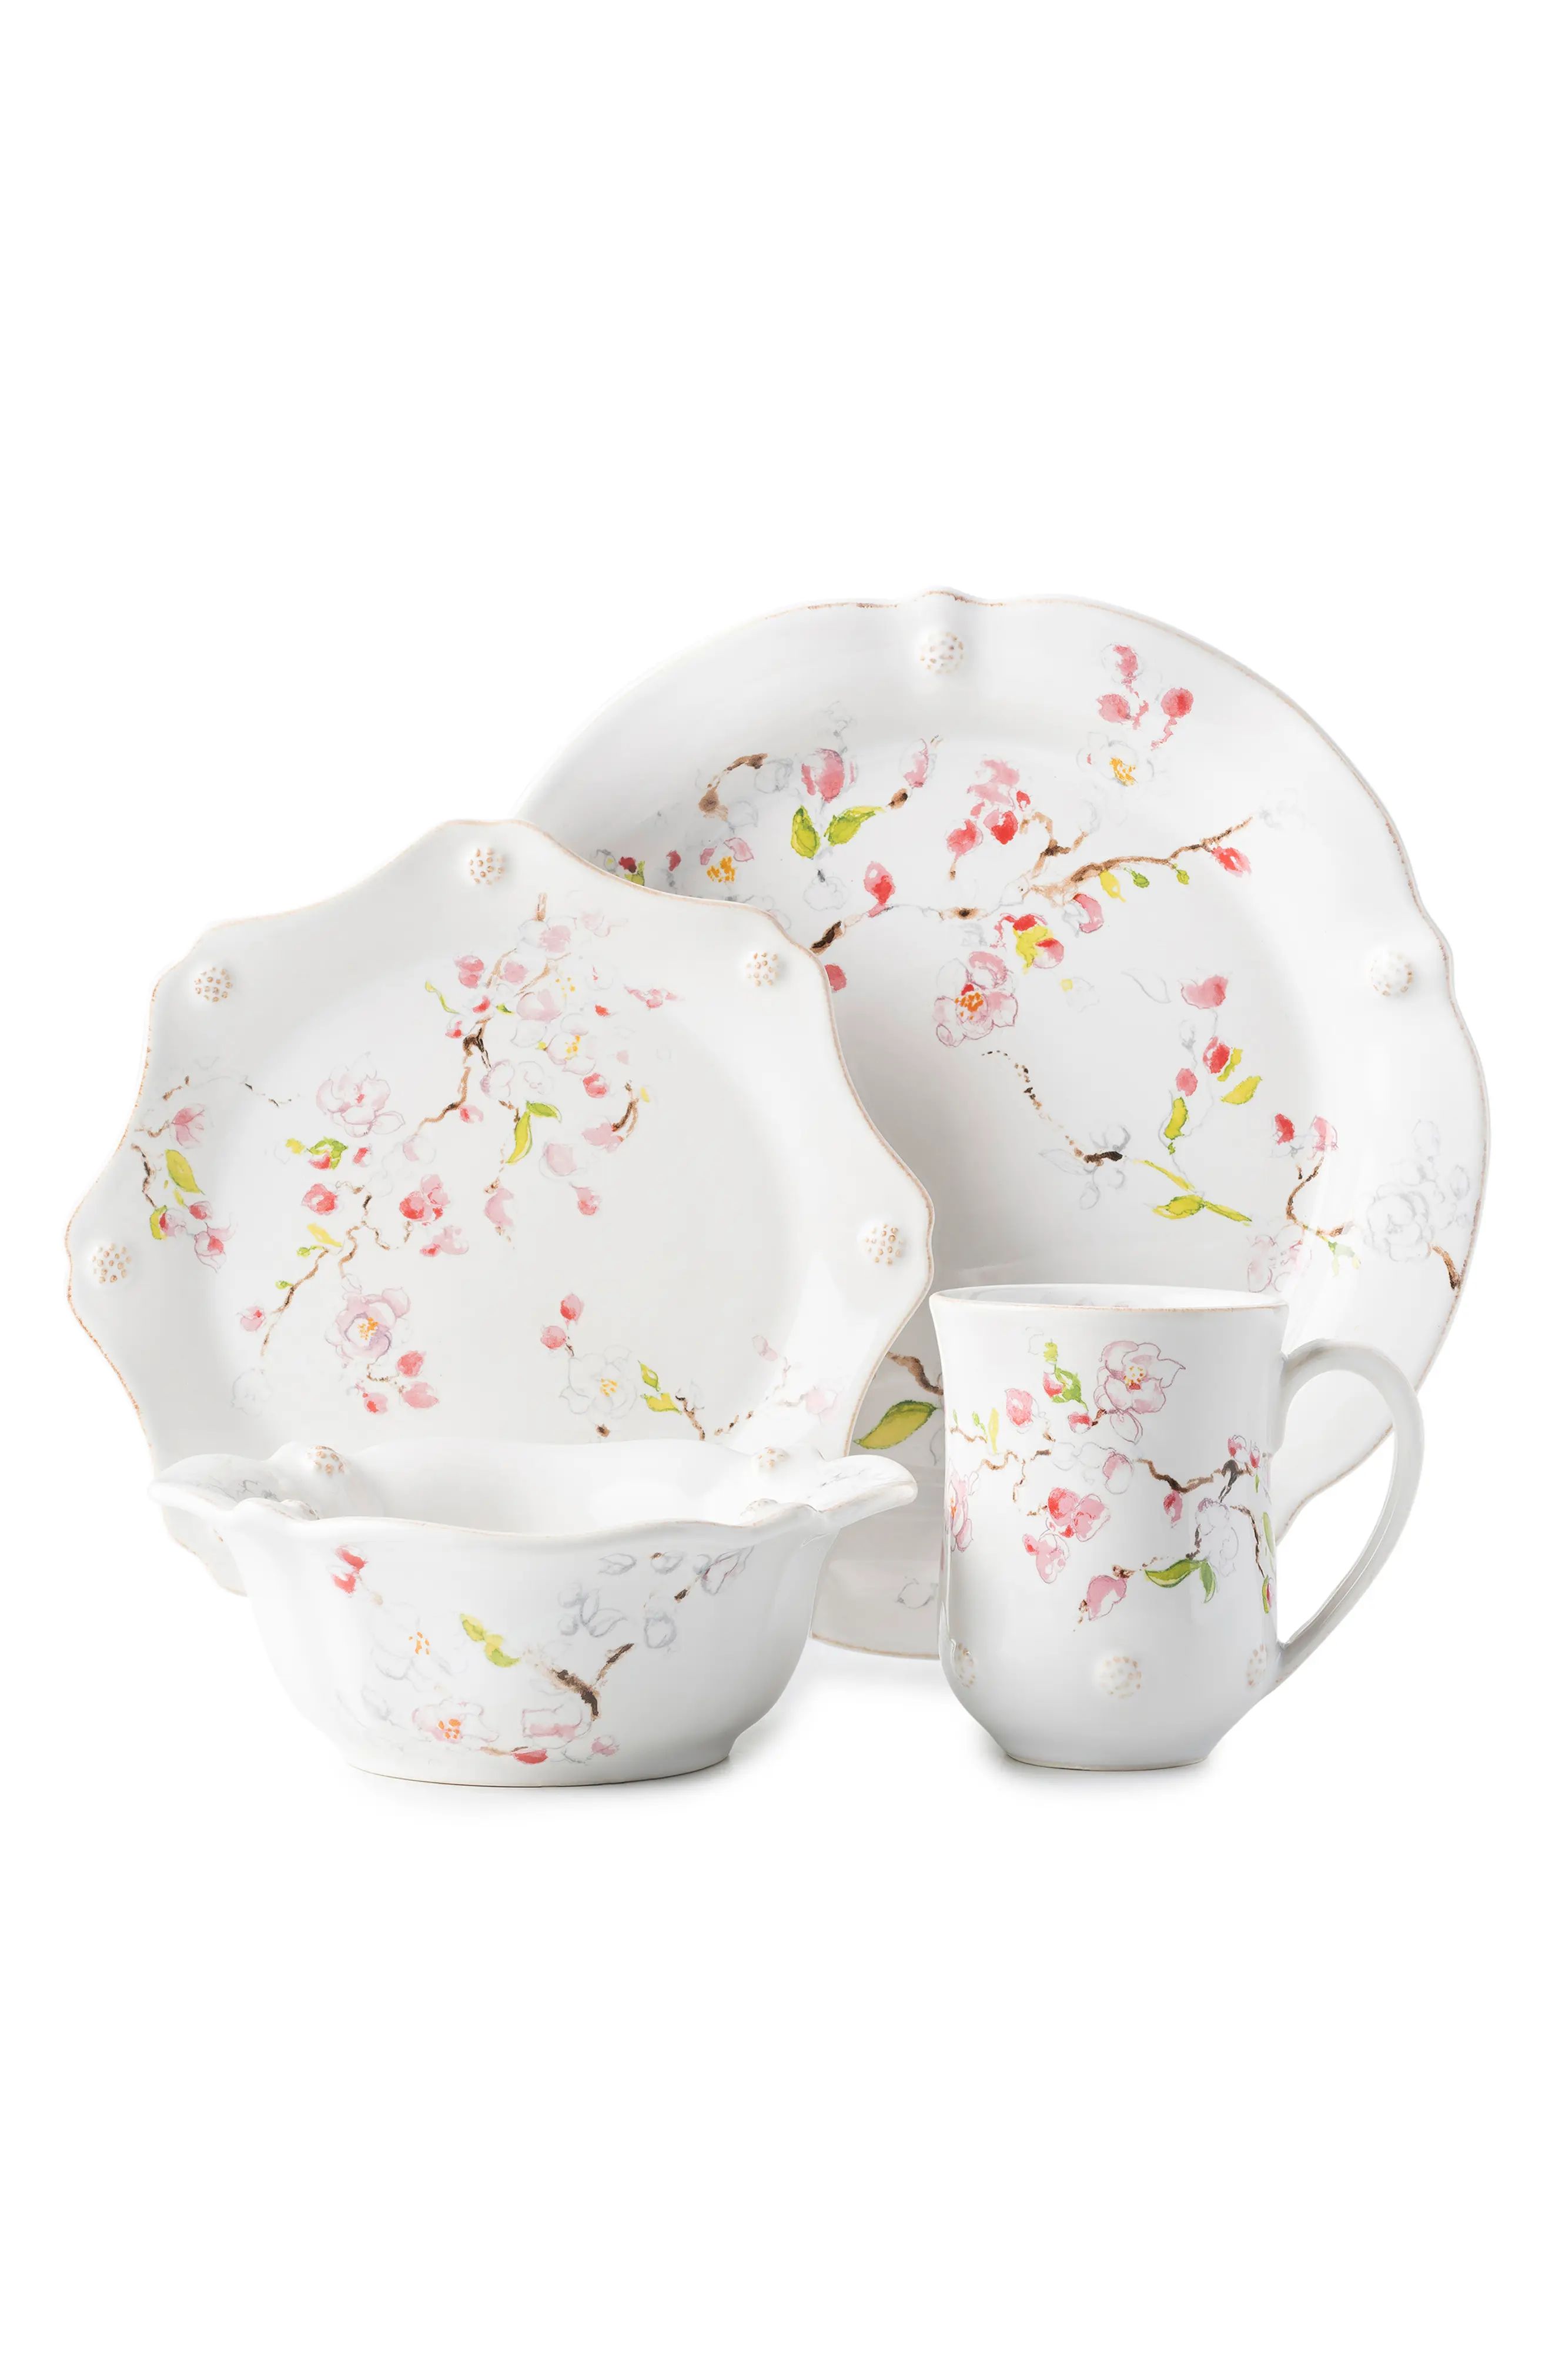 Juliska Cherry Blossom 4-Piece Place Setting, Size One Size - White | Nordstrom